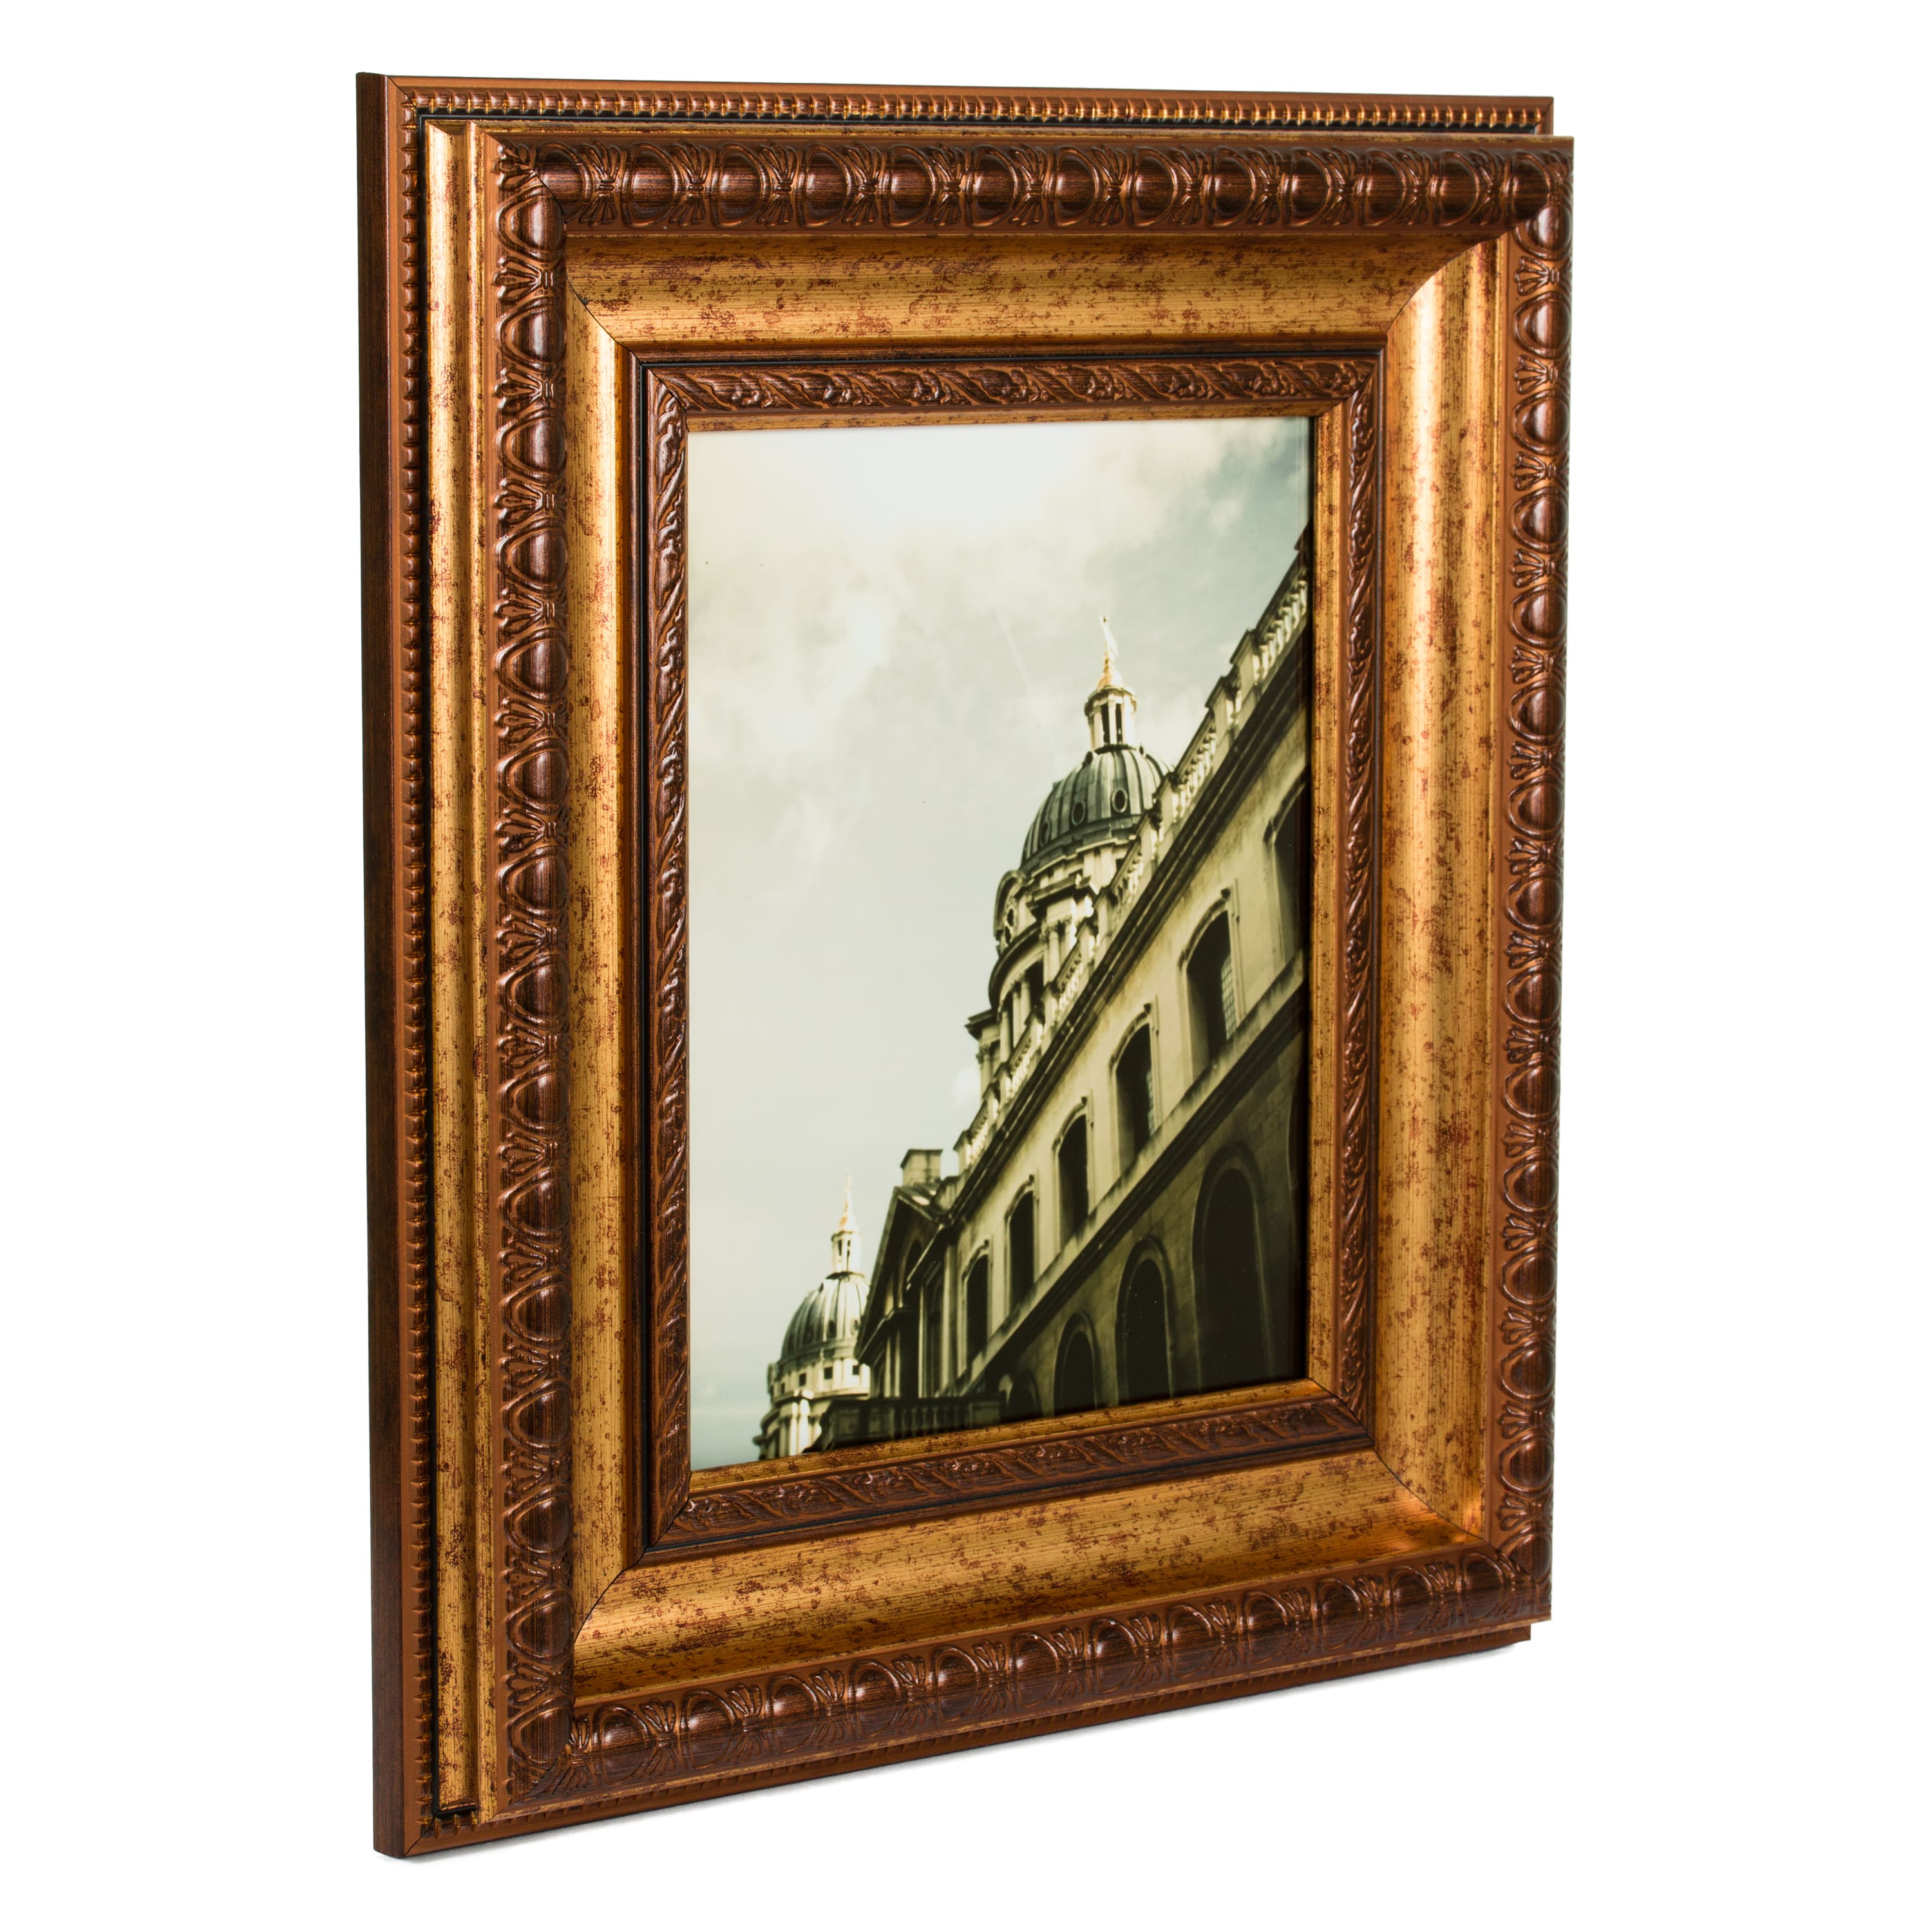 Craig Frames Arqadia Gothic Aged Gold Picture Frame